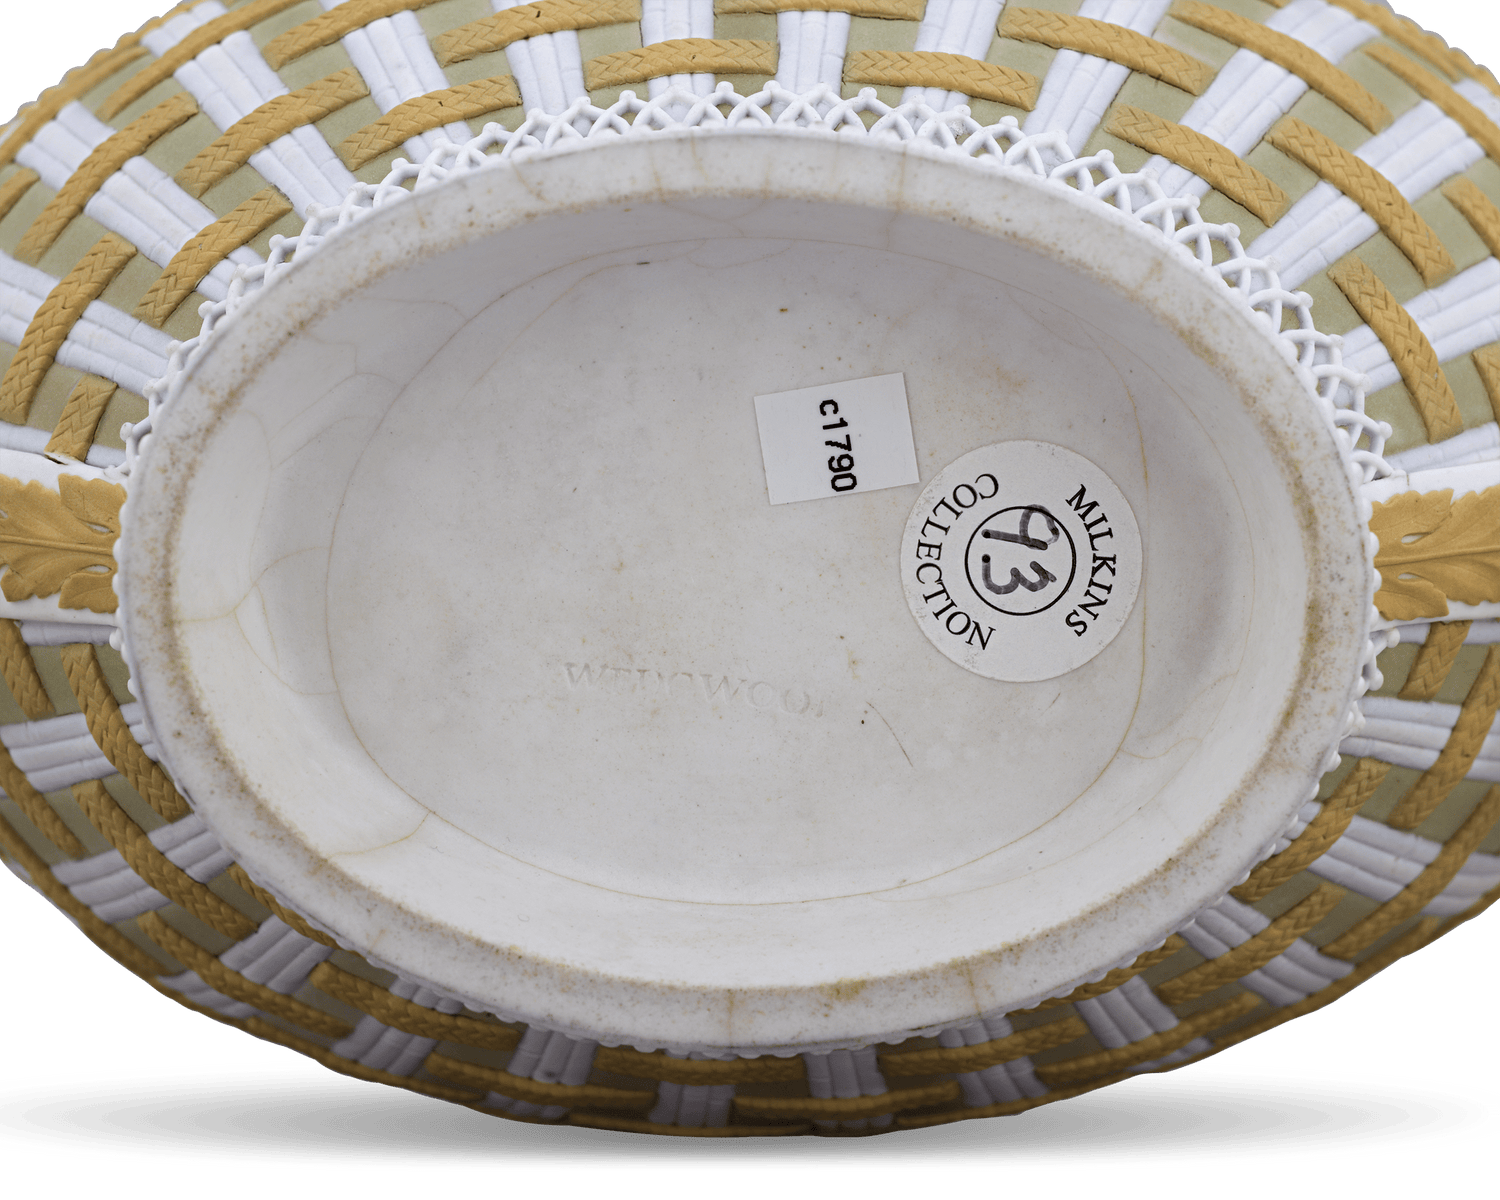 Wedgwood Tricolor Sauceboat